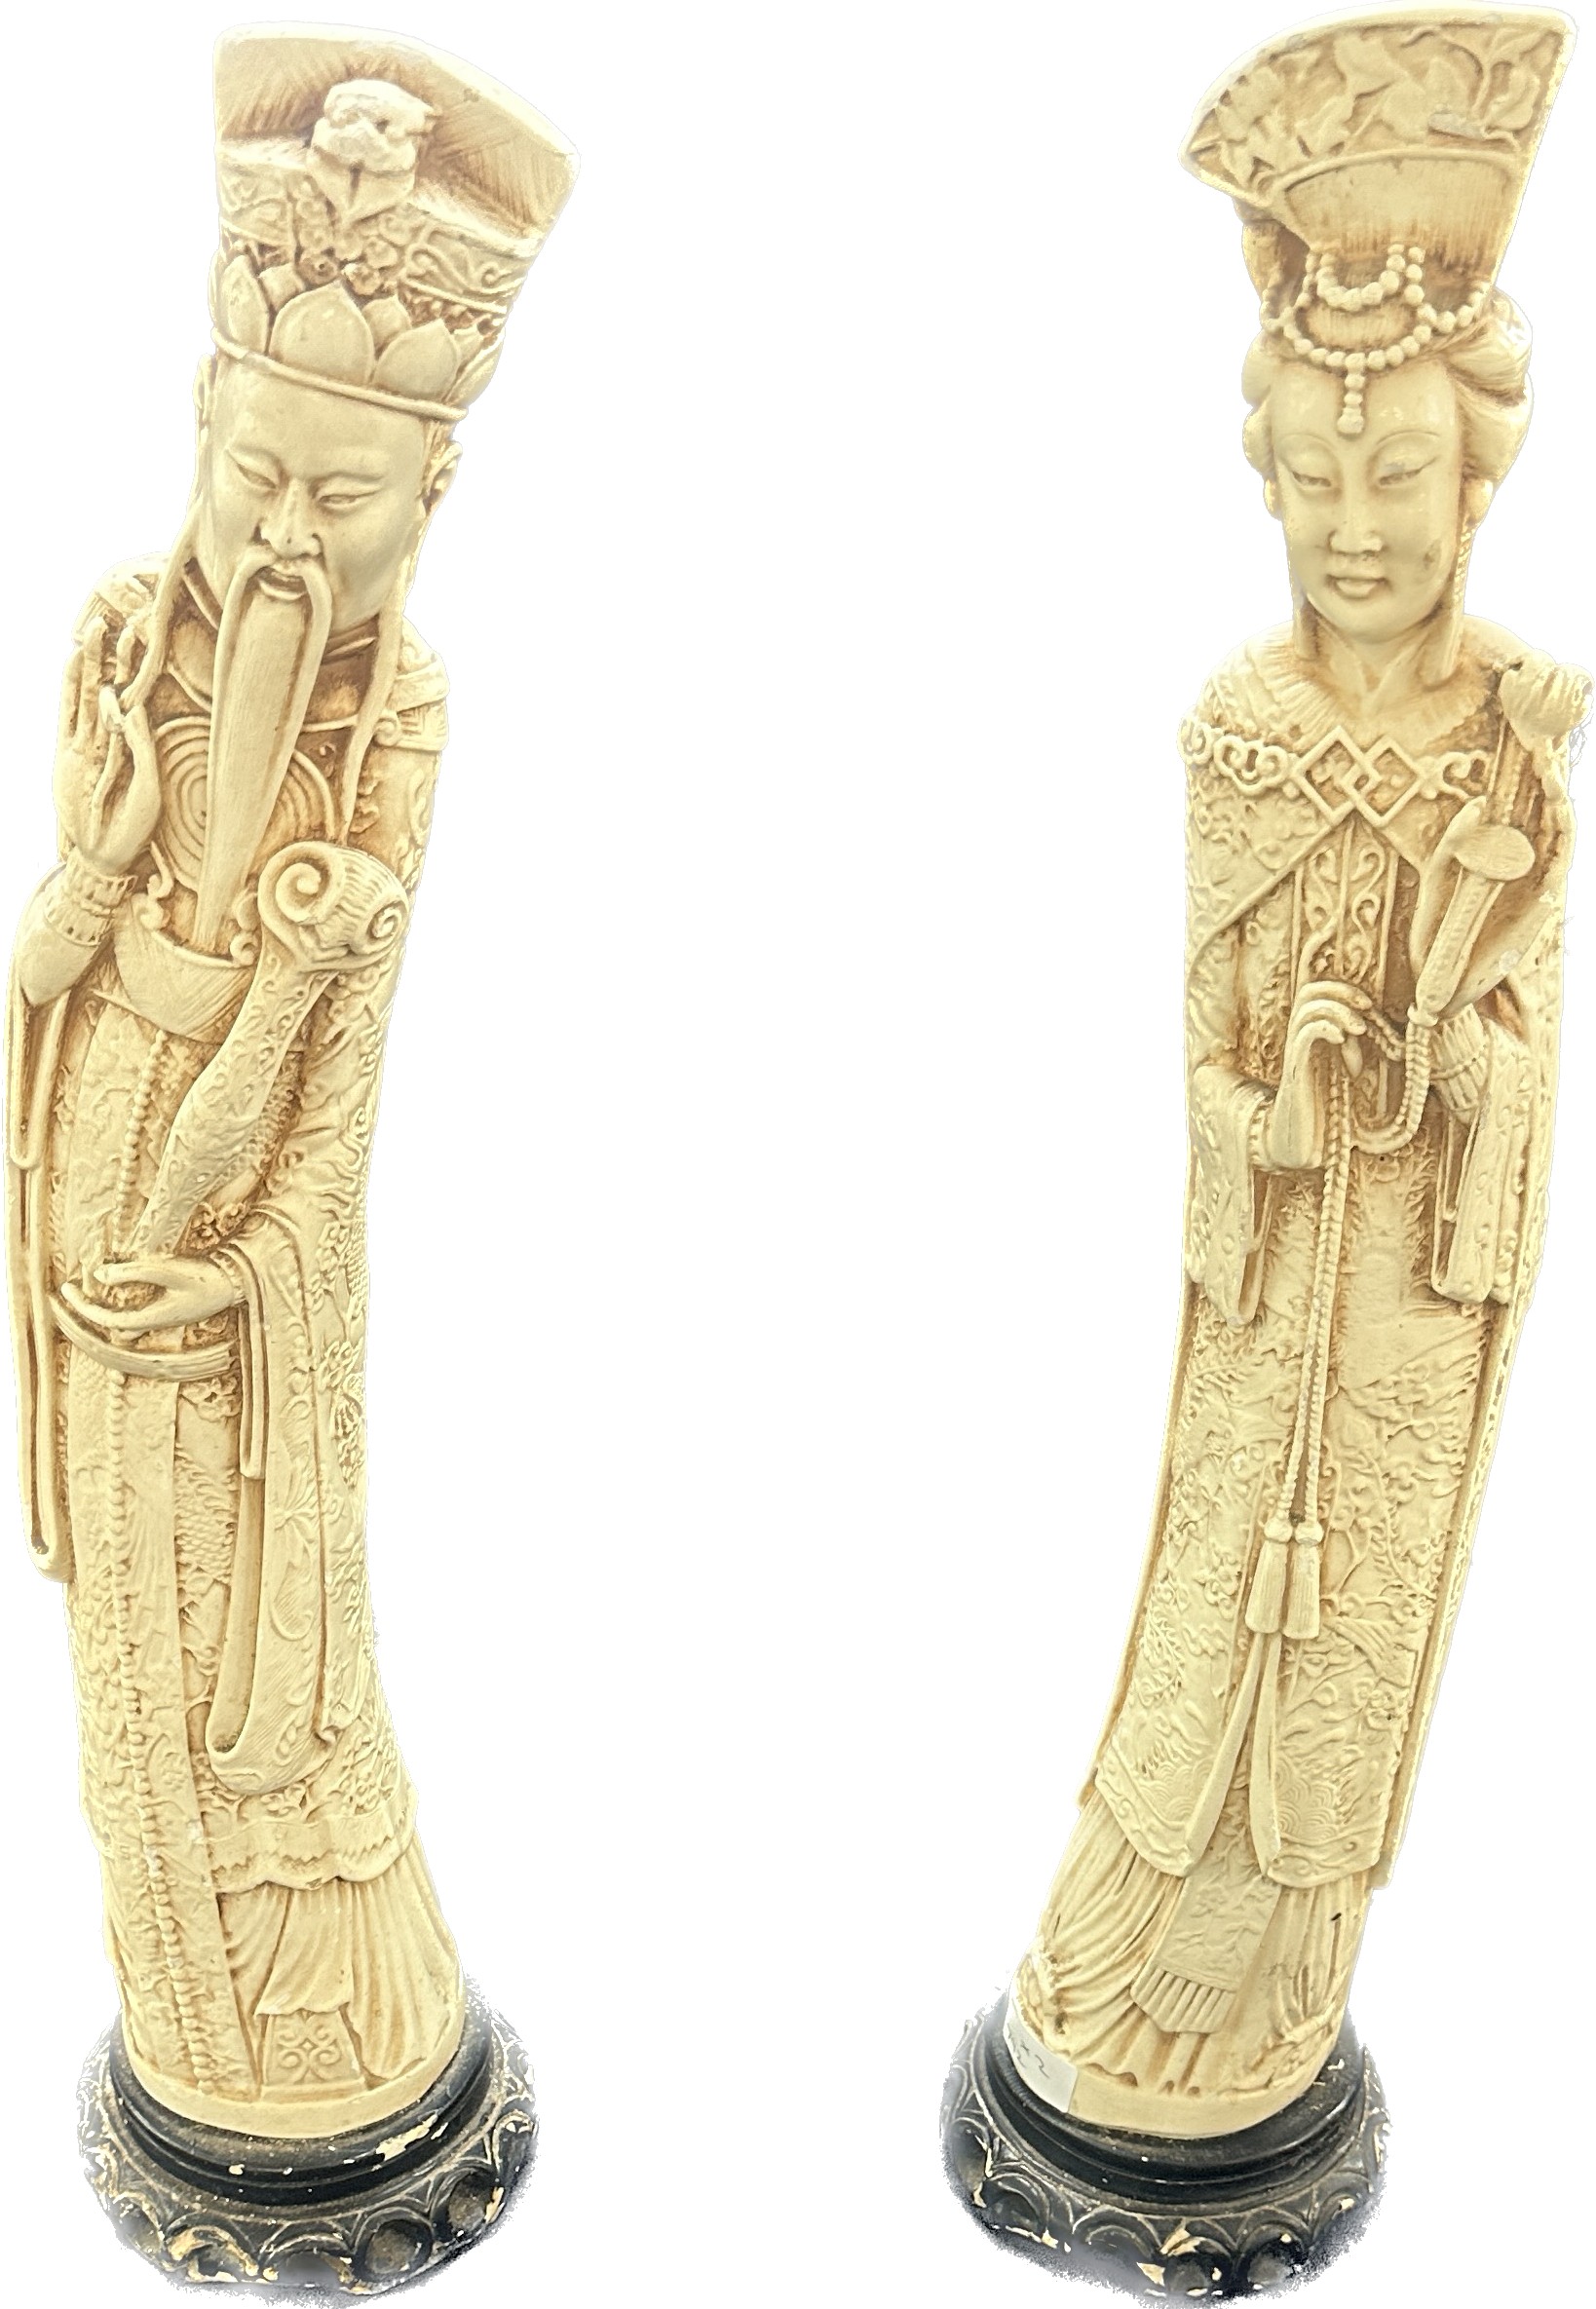 Pair of oriental chinese figures a/f height 24 inches tall - Image 4 of 4